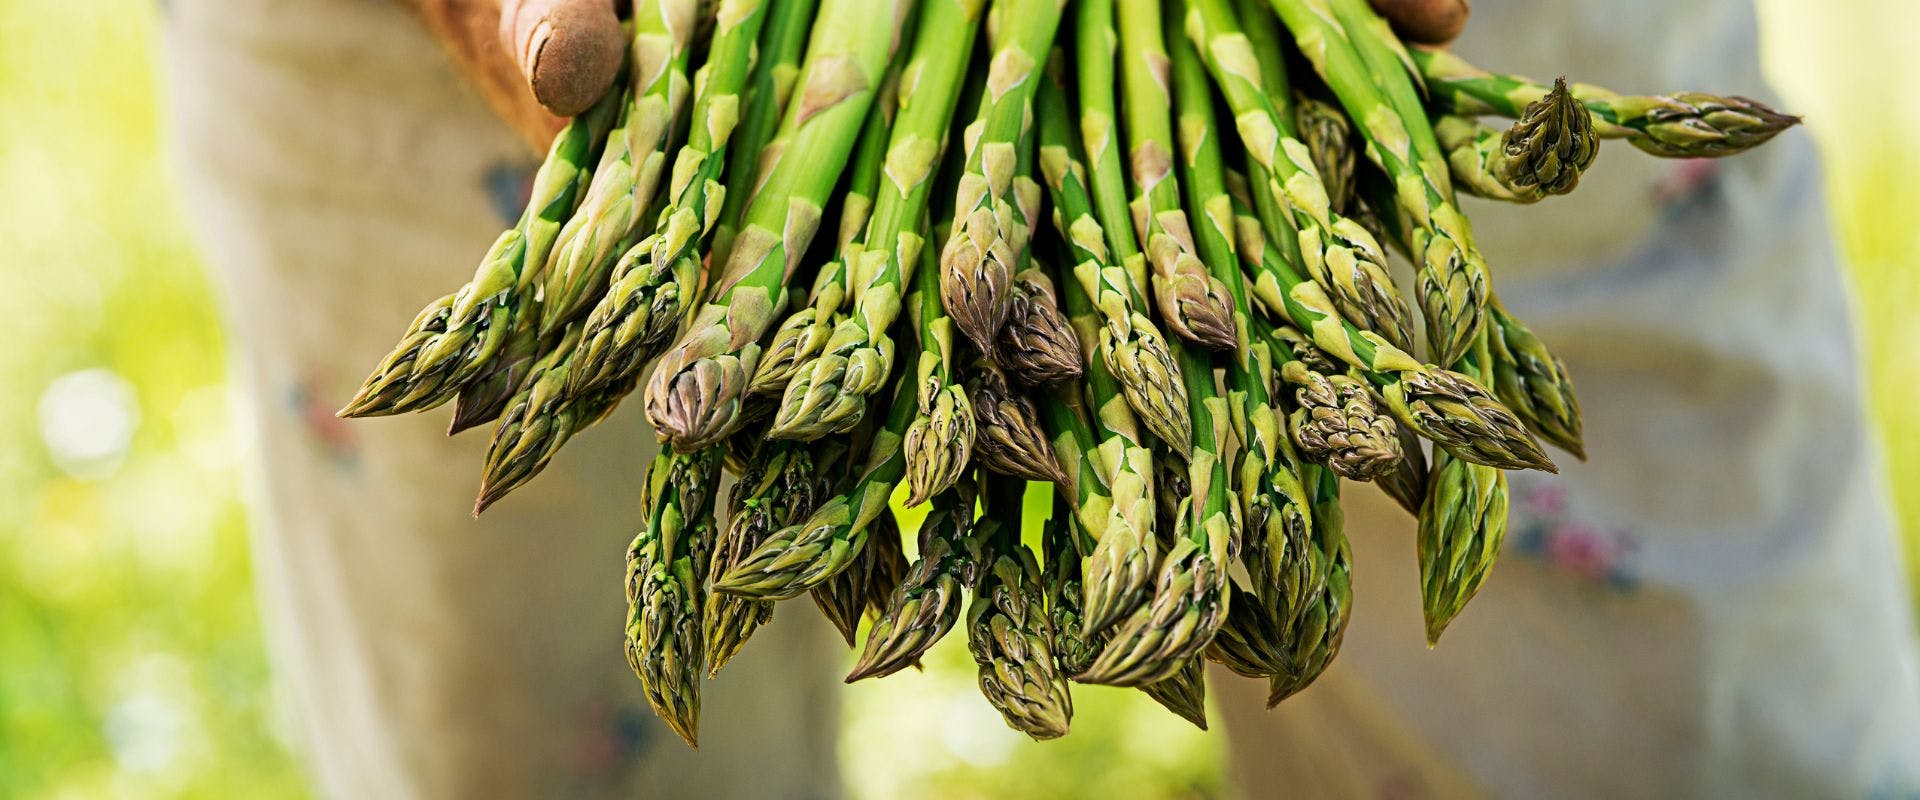 A bunch of asparagus being held